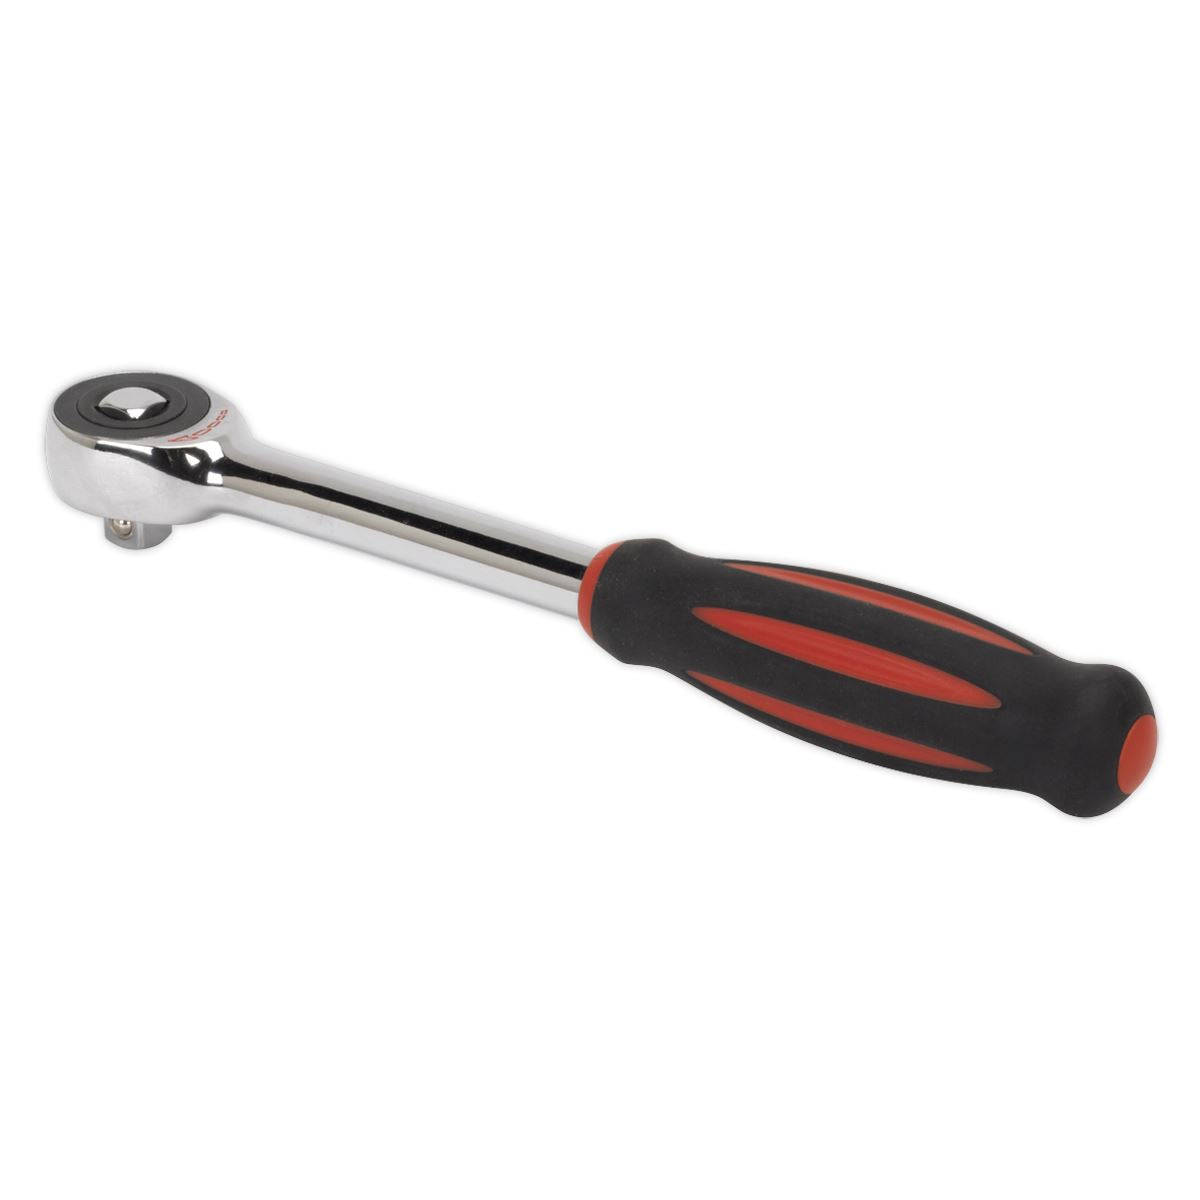 Sealey Ratchet Speed Wrench Handle 1/2" Drive Push Through Reverse Premier